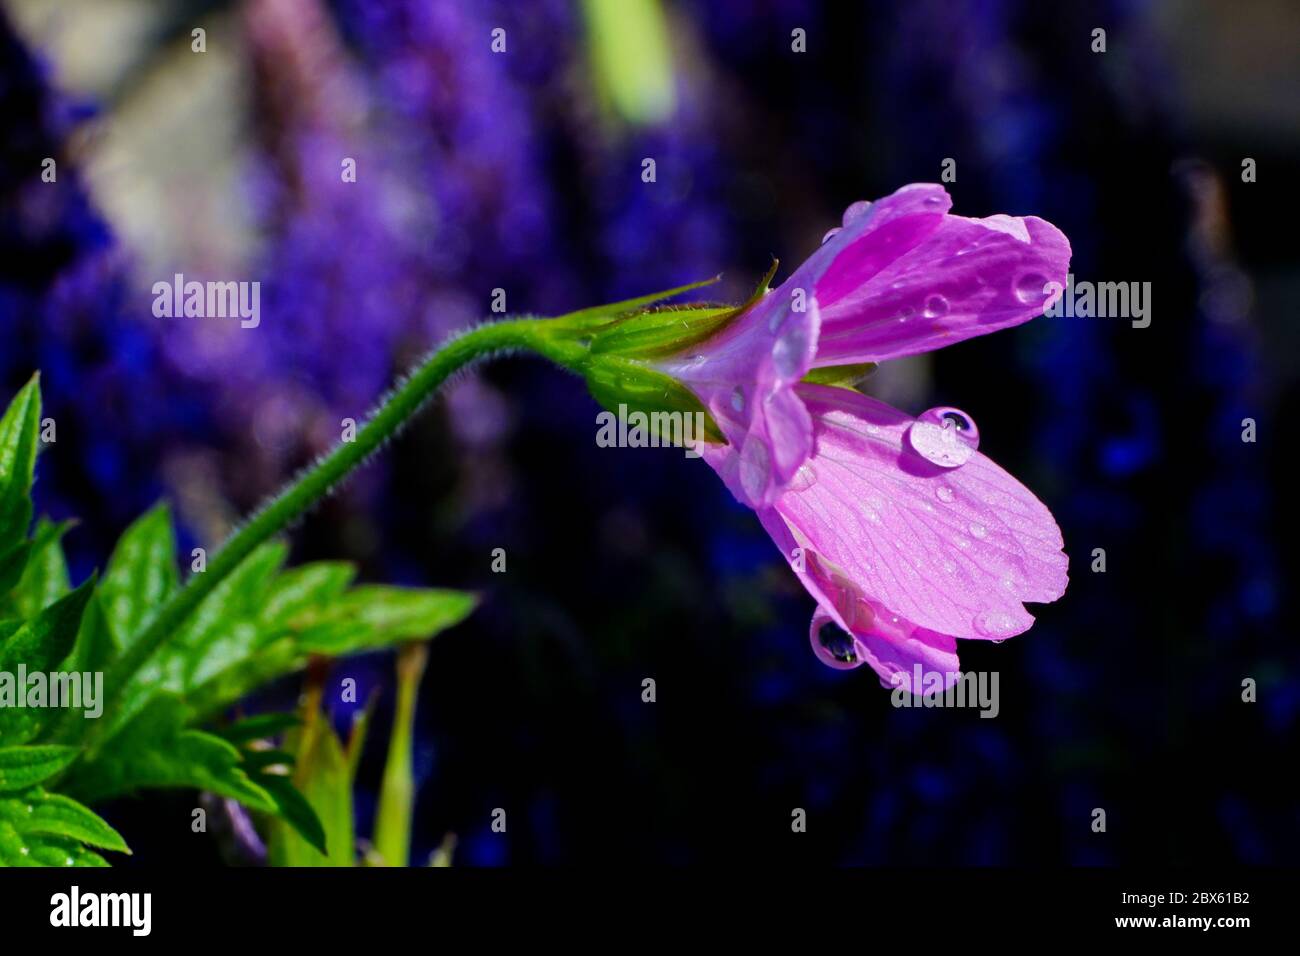 The geranium rendresii orinigally from the Pyrenees. The flower is pink and this was photographed using a macro lens. Stock Photo